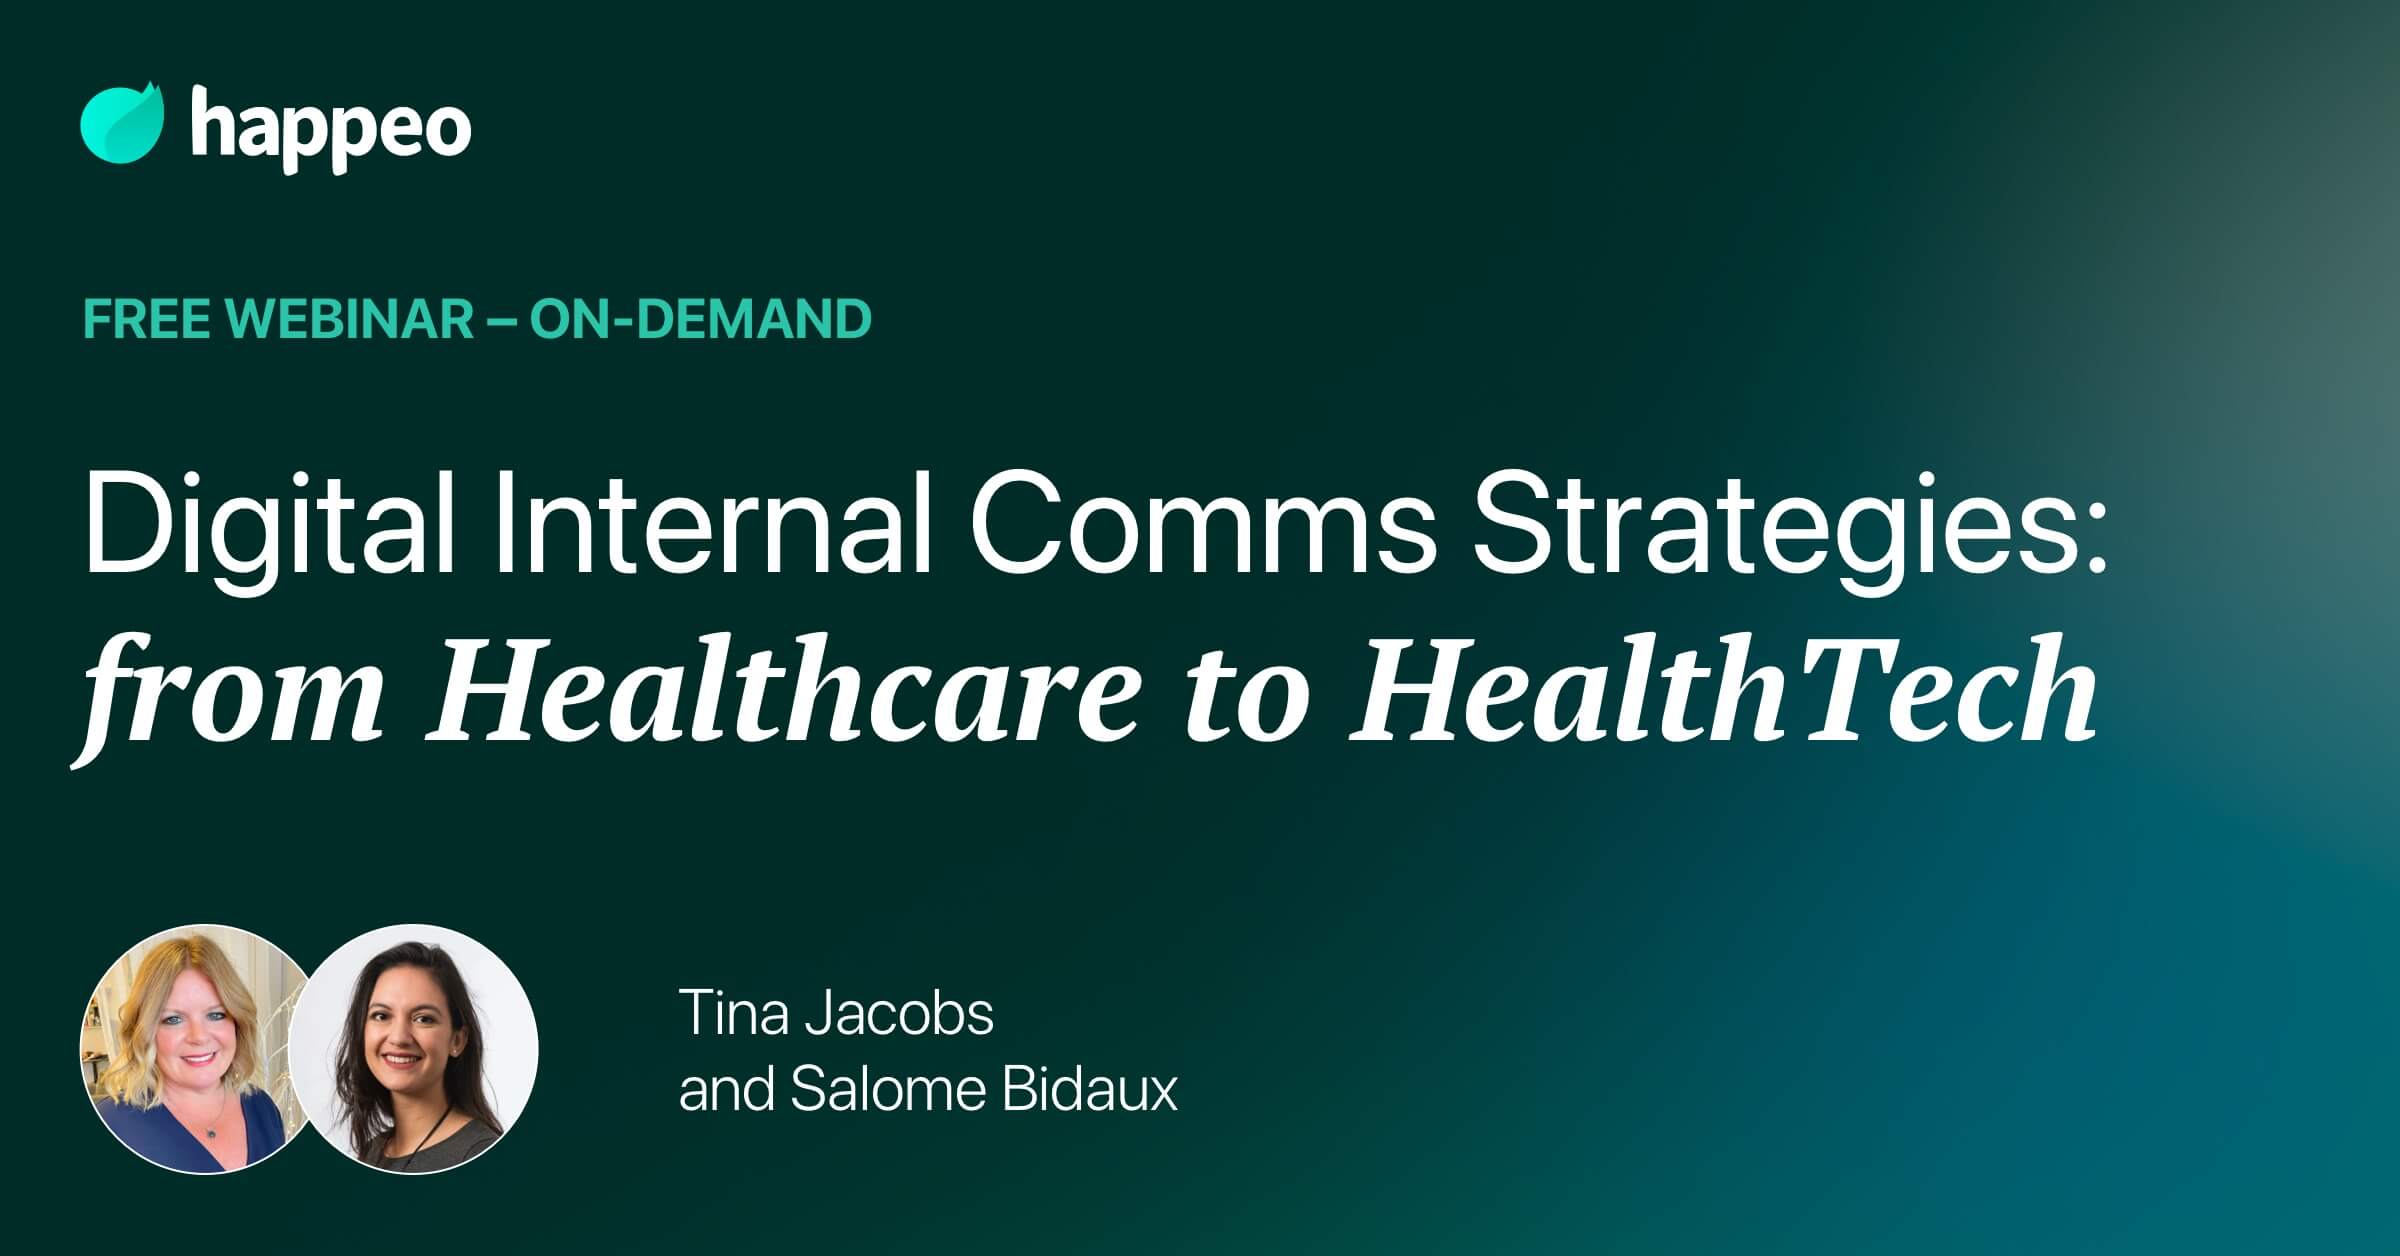 Digital Internal Comms Strategies: from Healthcare to HealthTech